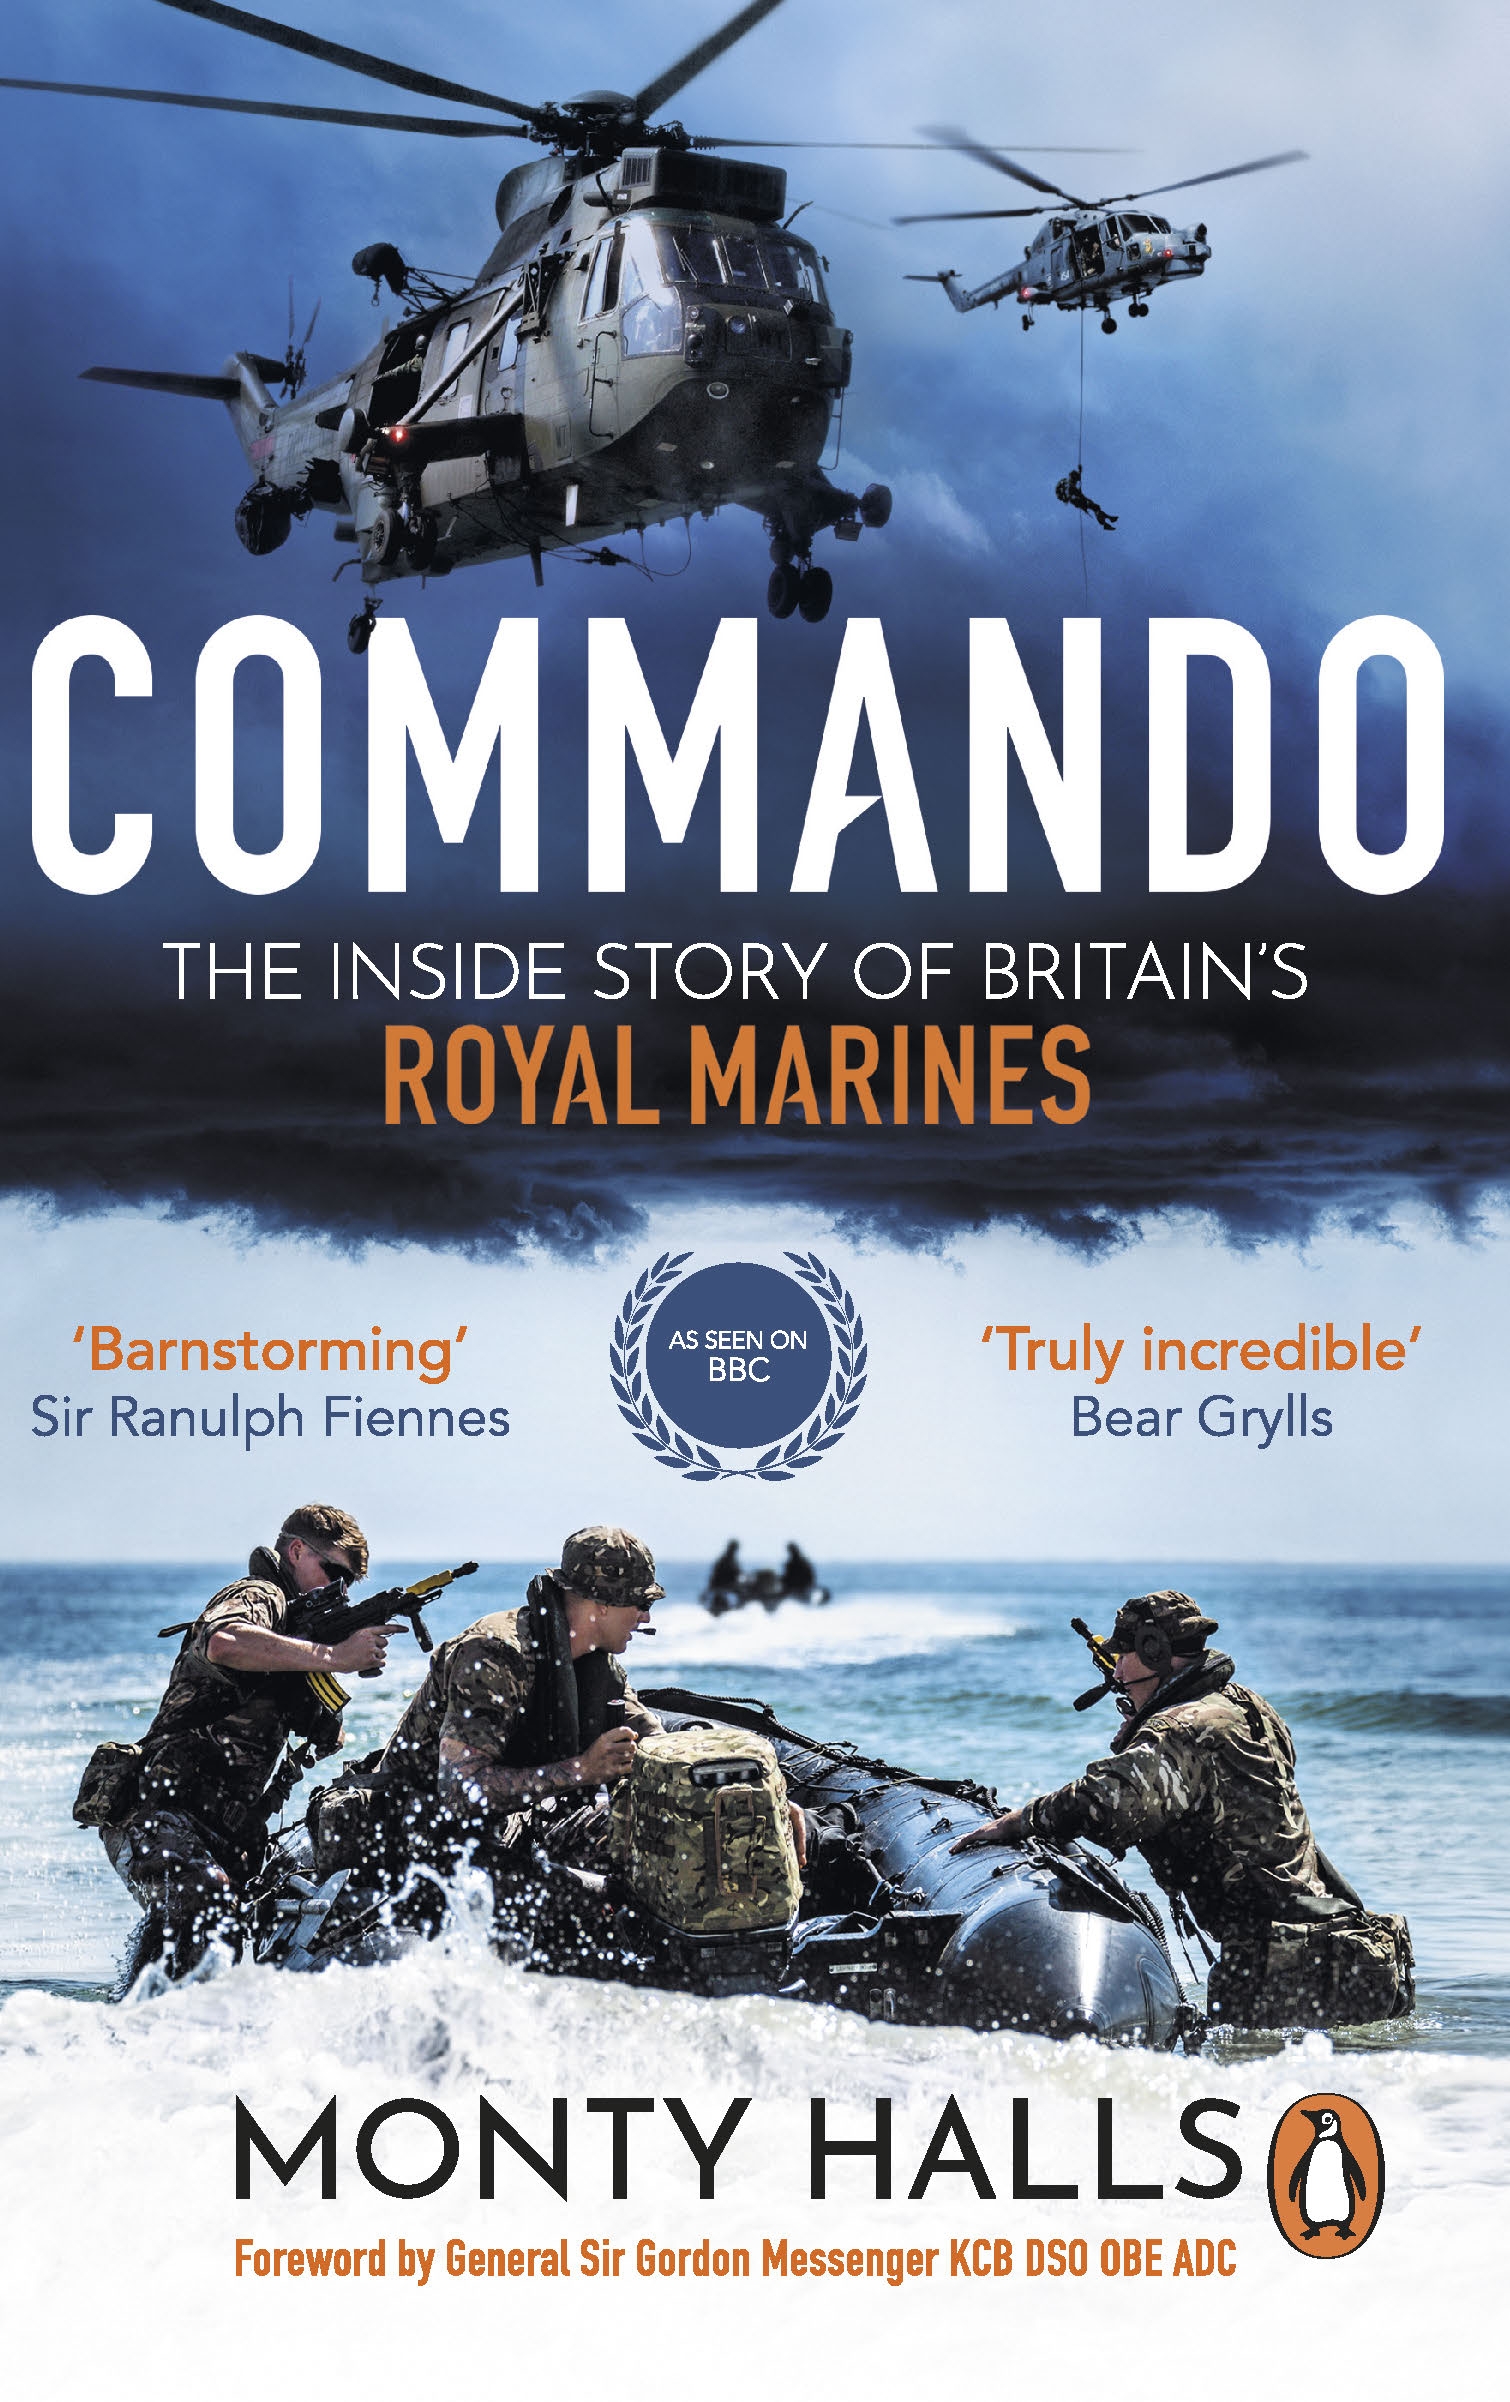 Commando_Paperback_Cover_the_inside_story_of_britains_royal_marines